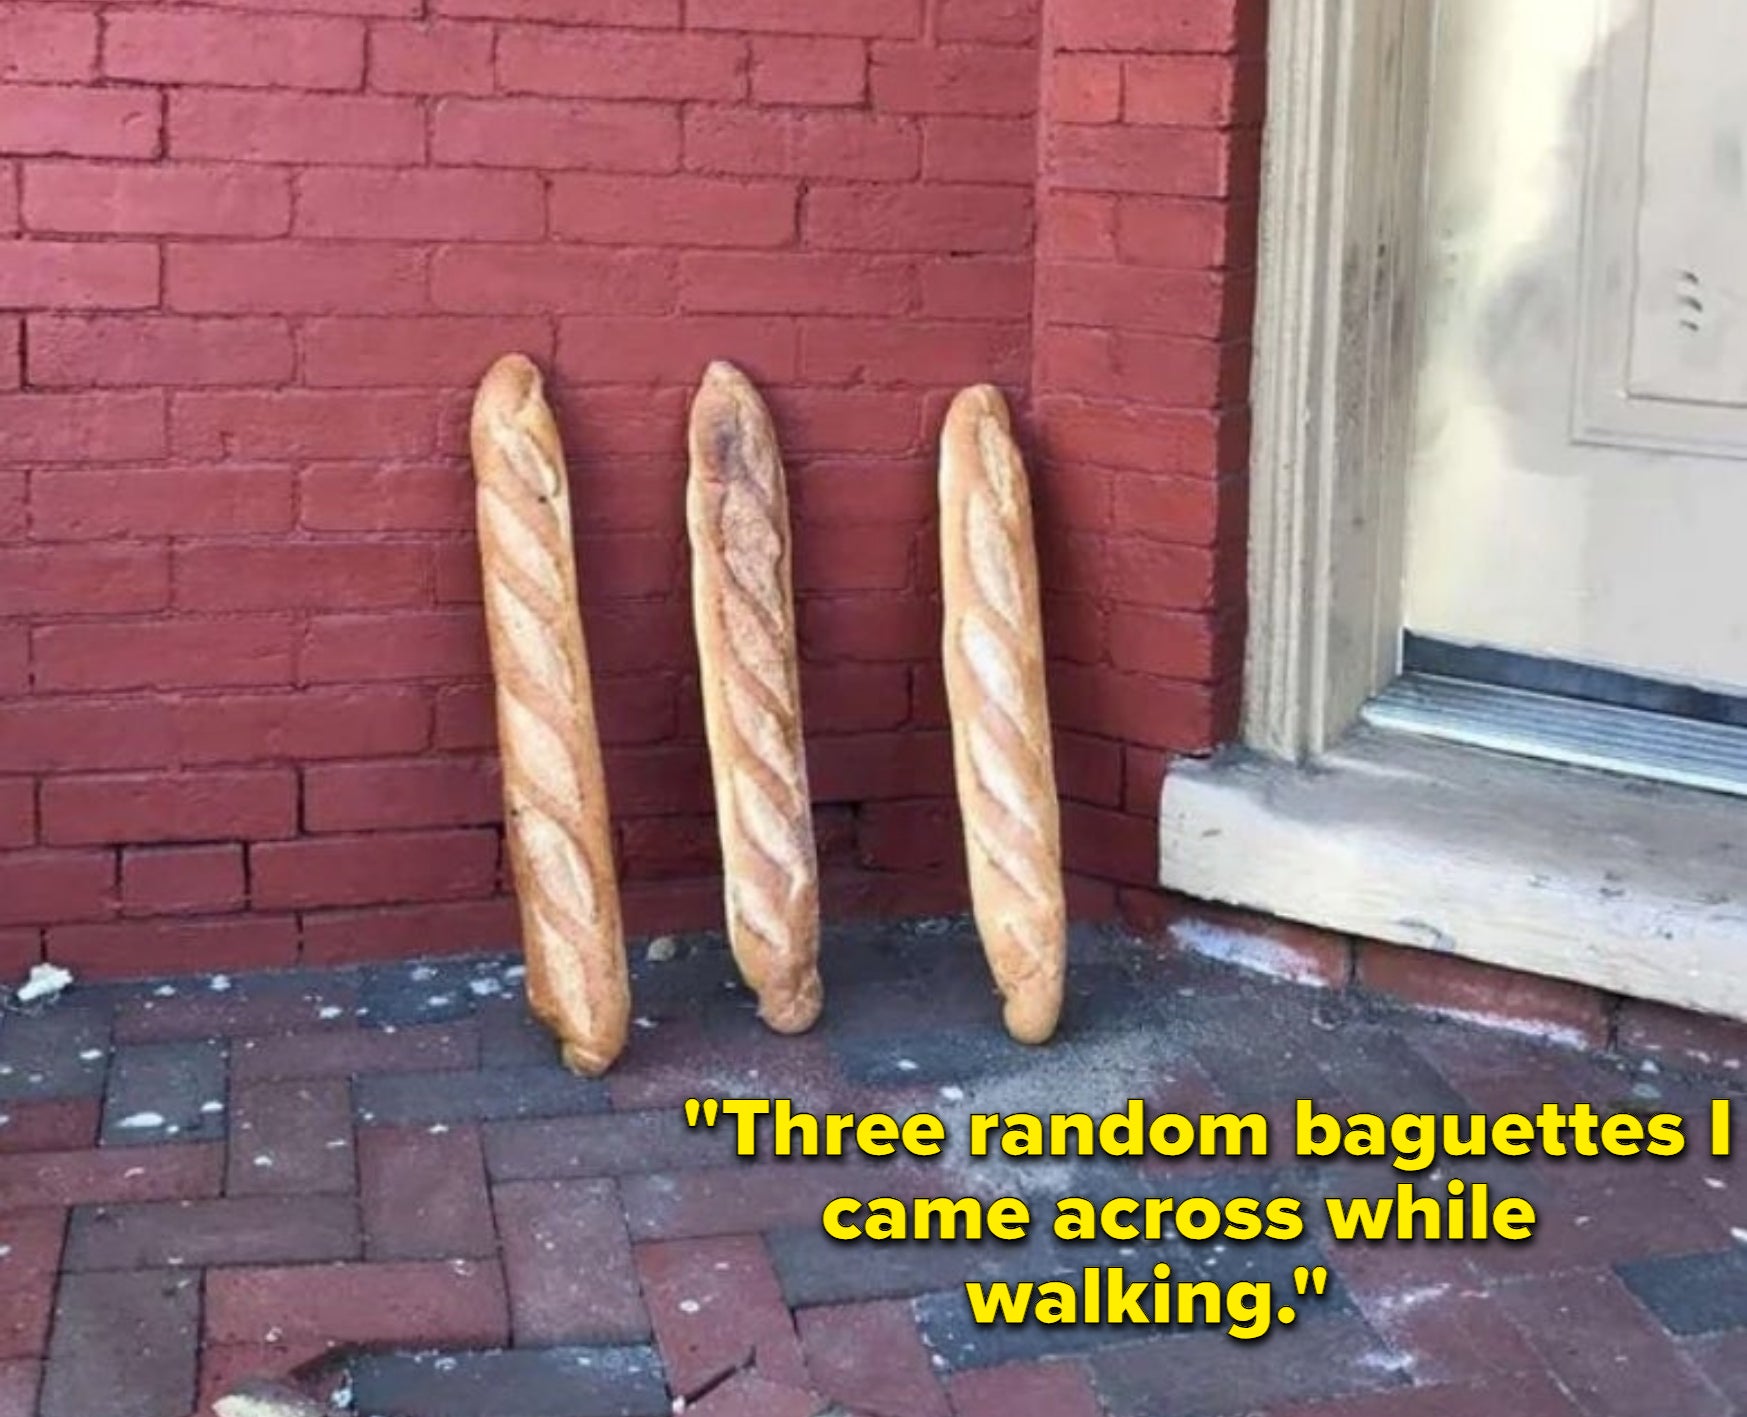 Three random baguettes are chilling outside, leaning against a brick wall